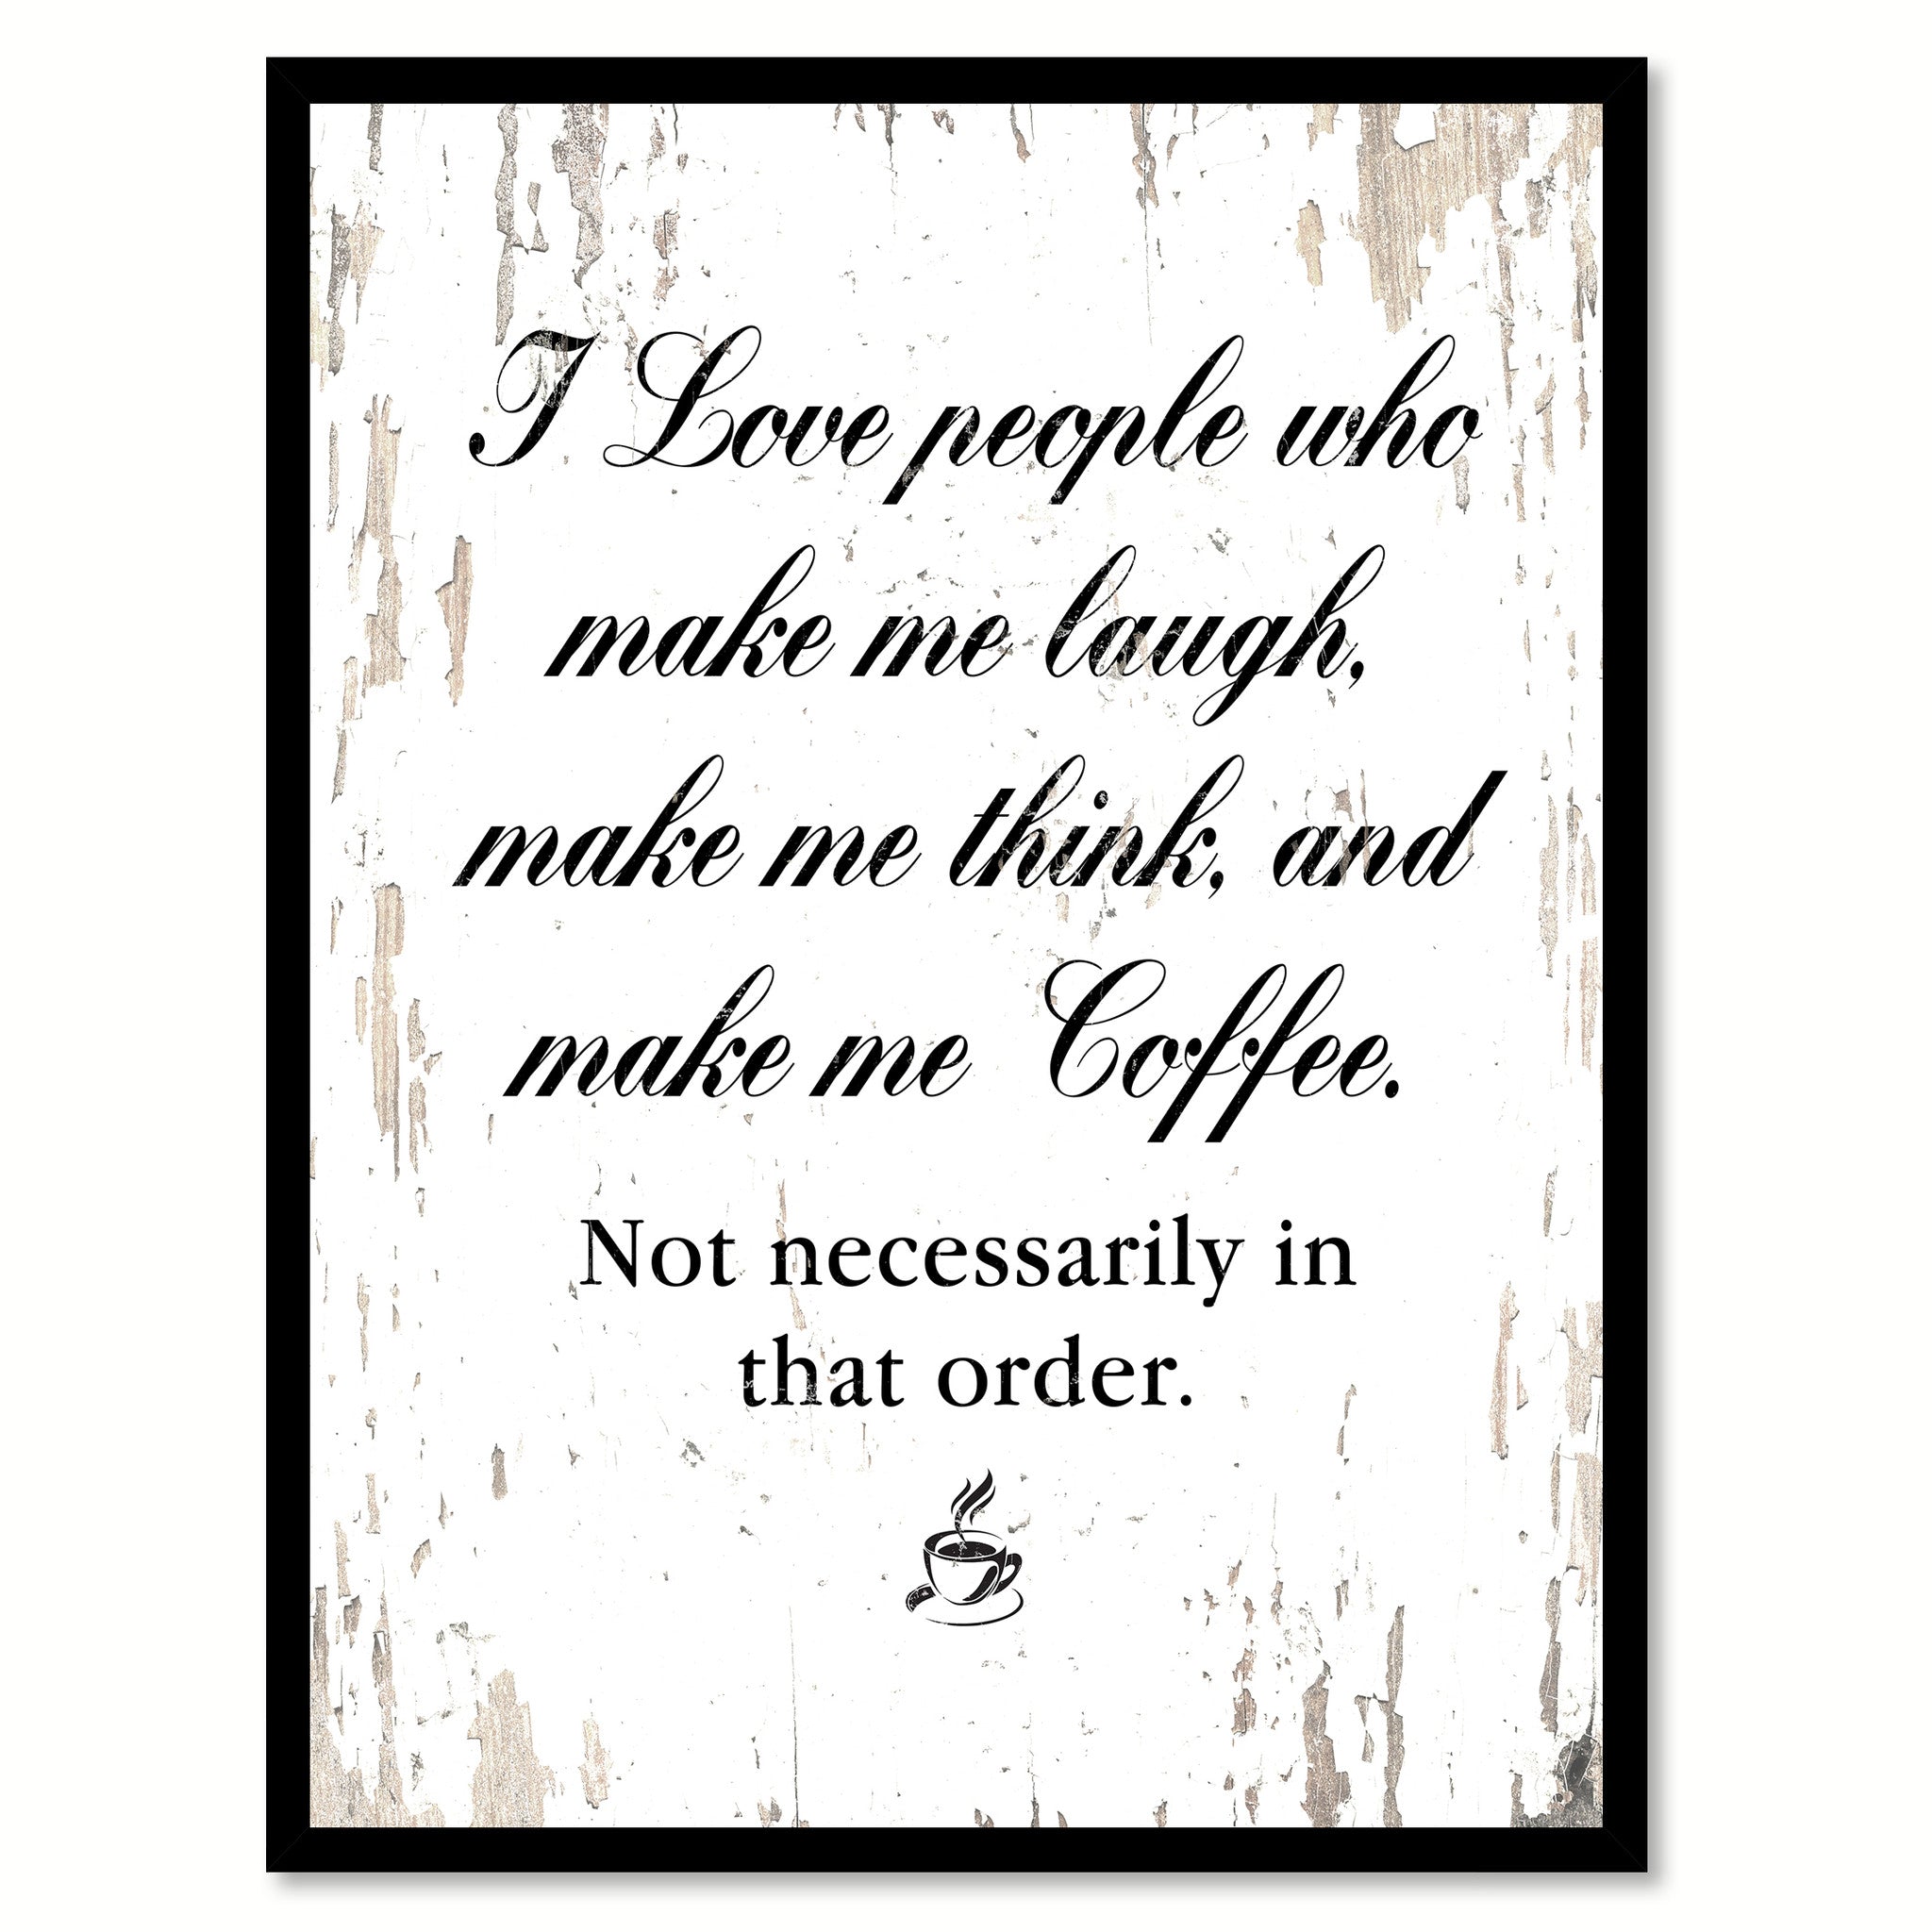 I Love People Who Make Me Laugh, Make Me Think & Make Me coffee Quote Saying Canvas Print with Picture Frame